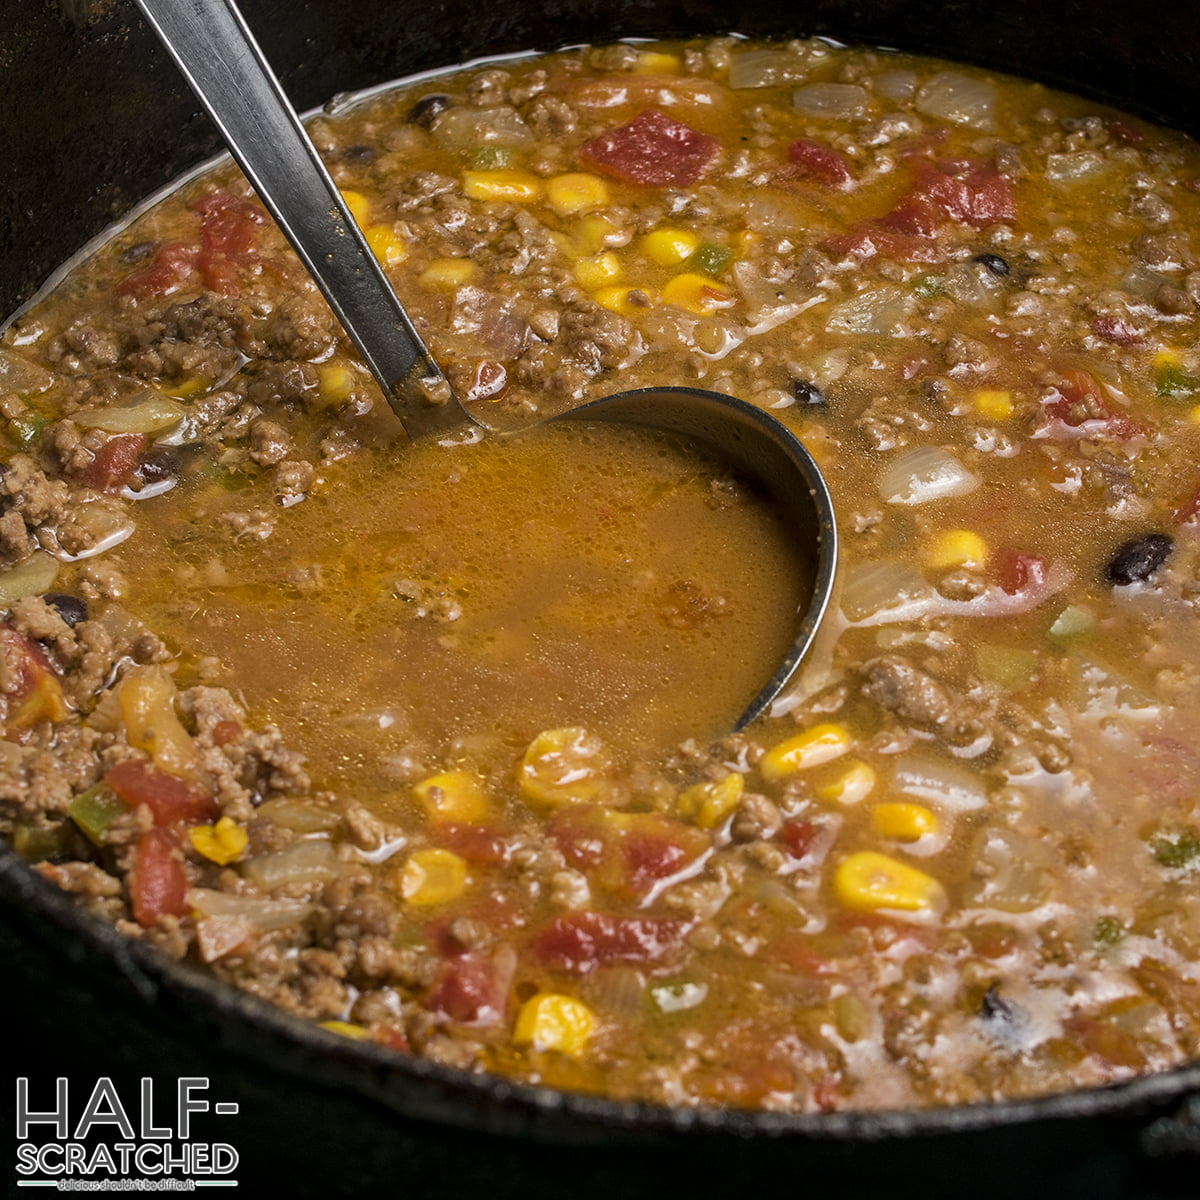 Ladling Pioneer Woman's taco soup from the pot